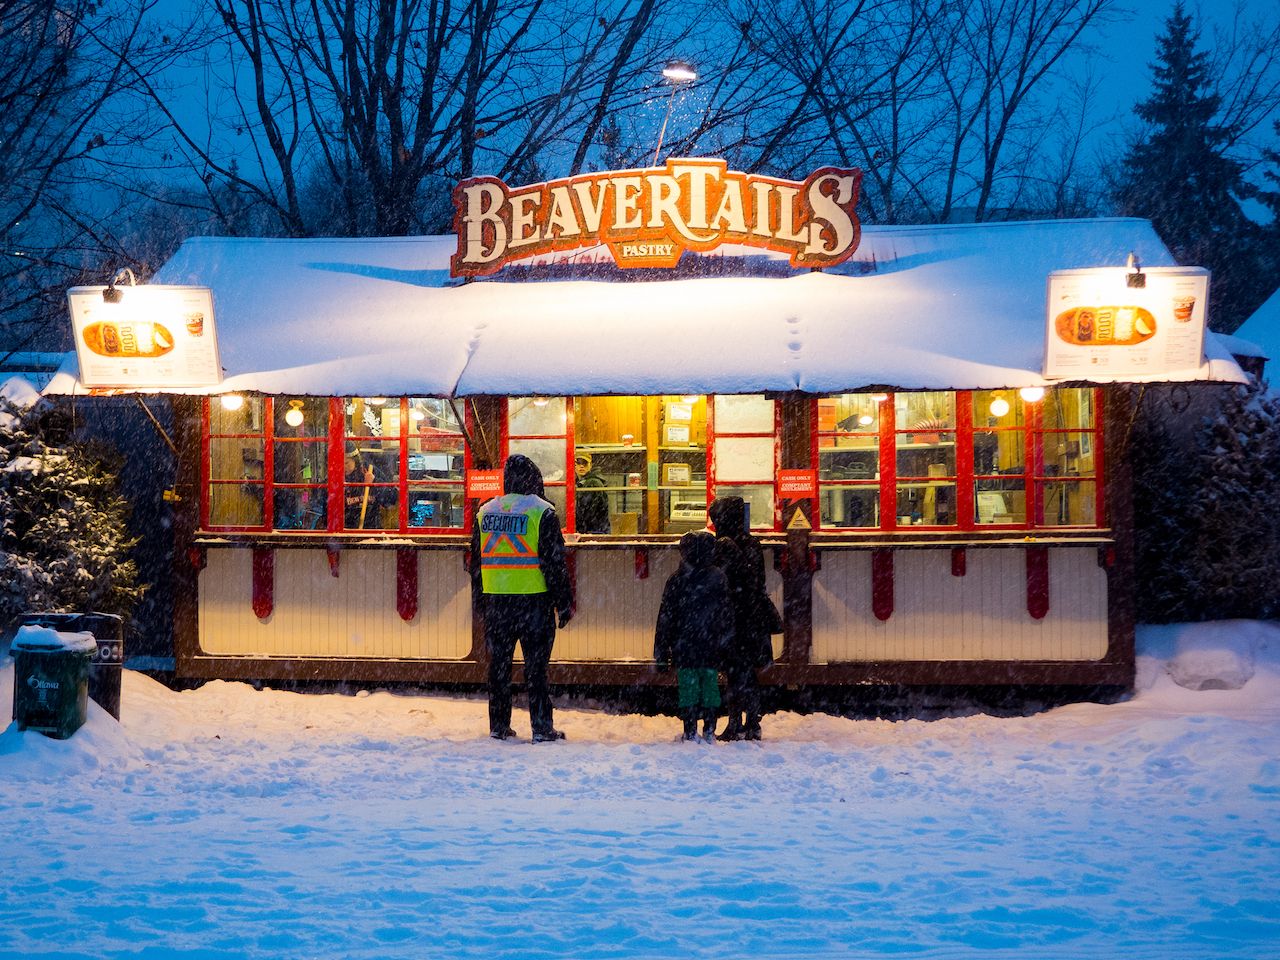 Beaver Tails pastry stand in Canada during winter